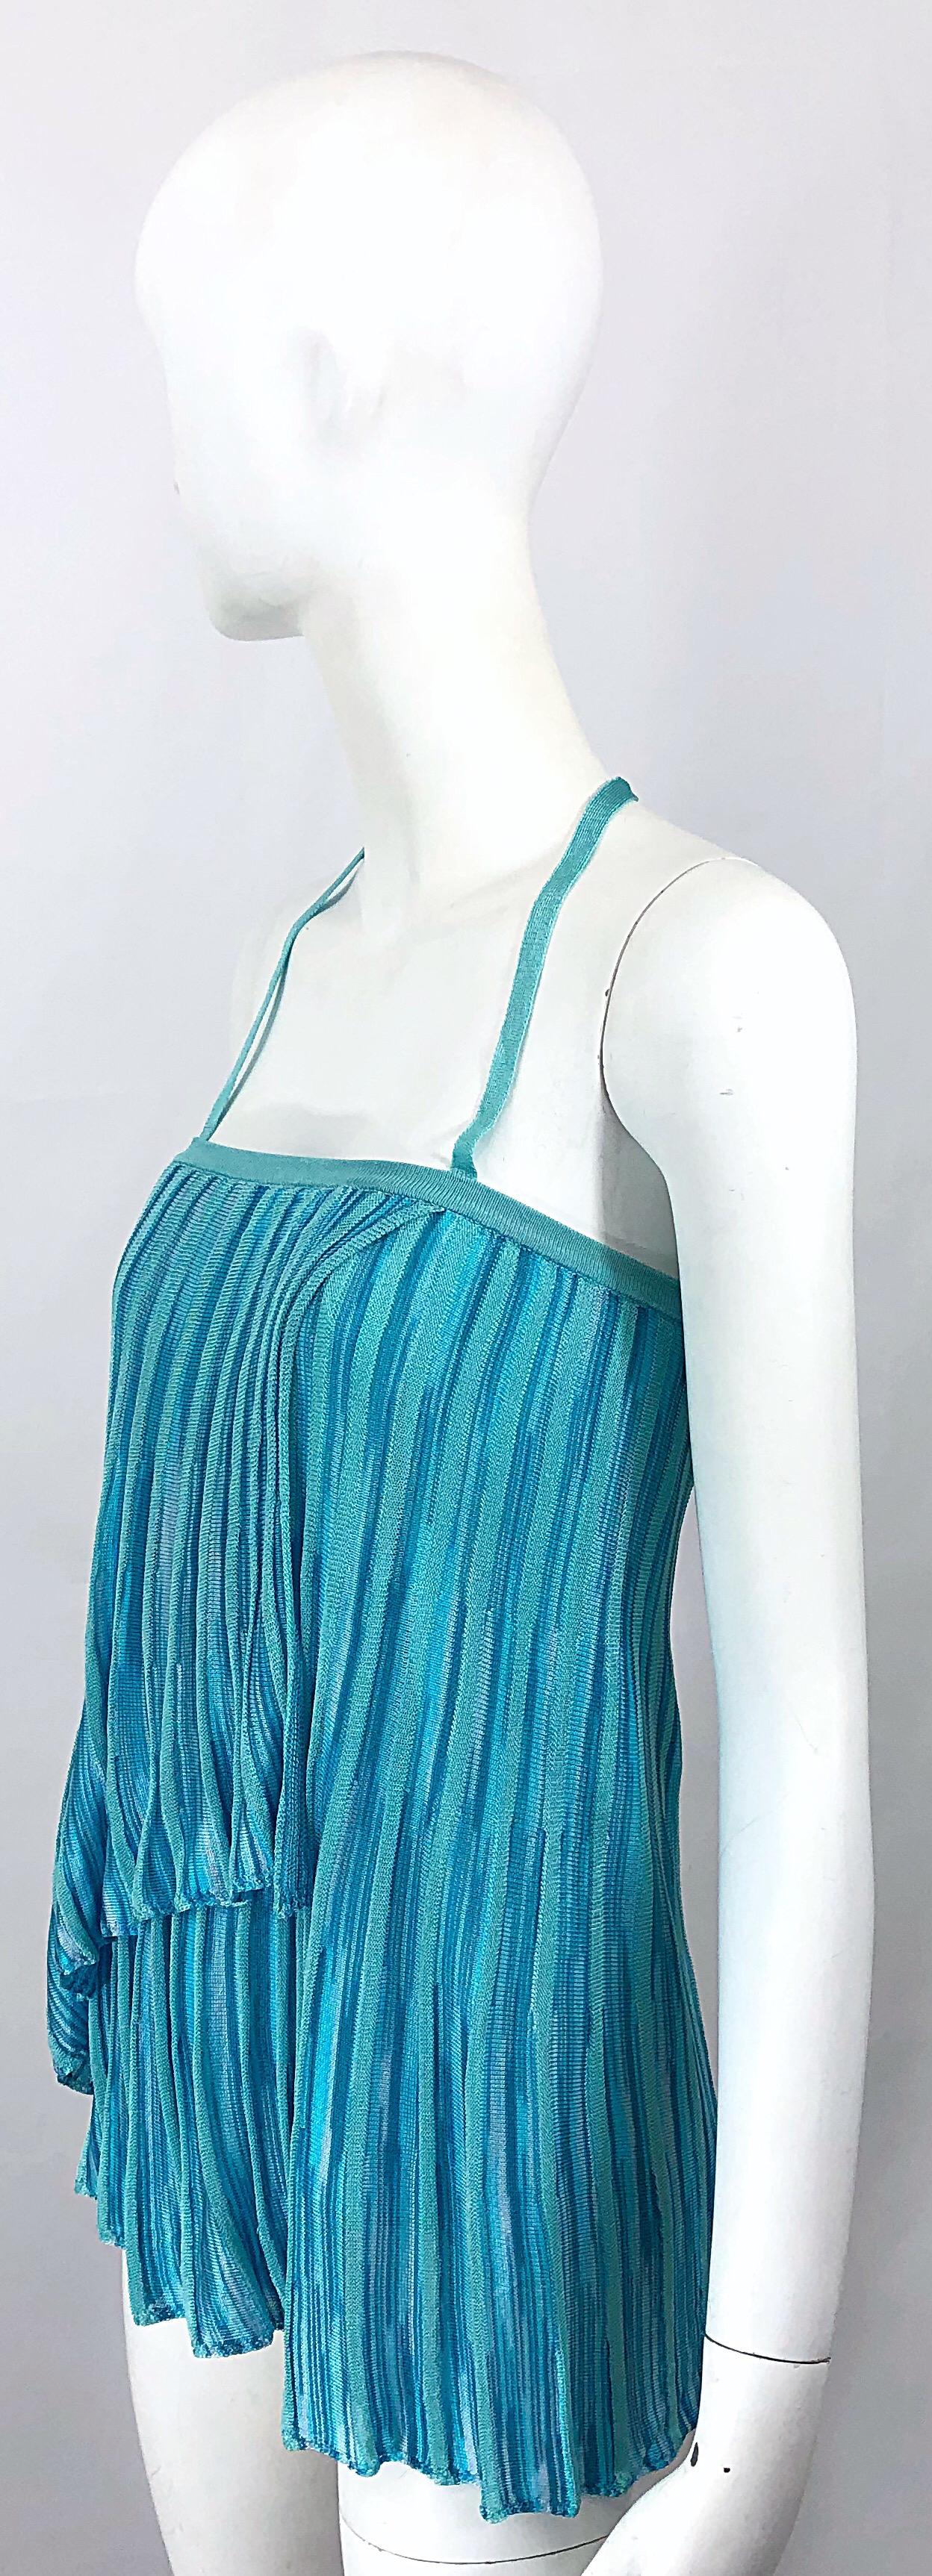 Vintage Missoni 1990s Turquoise Teal Blue Knit Vintage 90s Halter Top OR Skirt In Excellent Condition For Sale In San Diego, CA